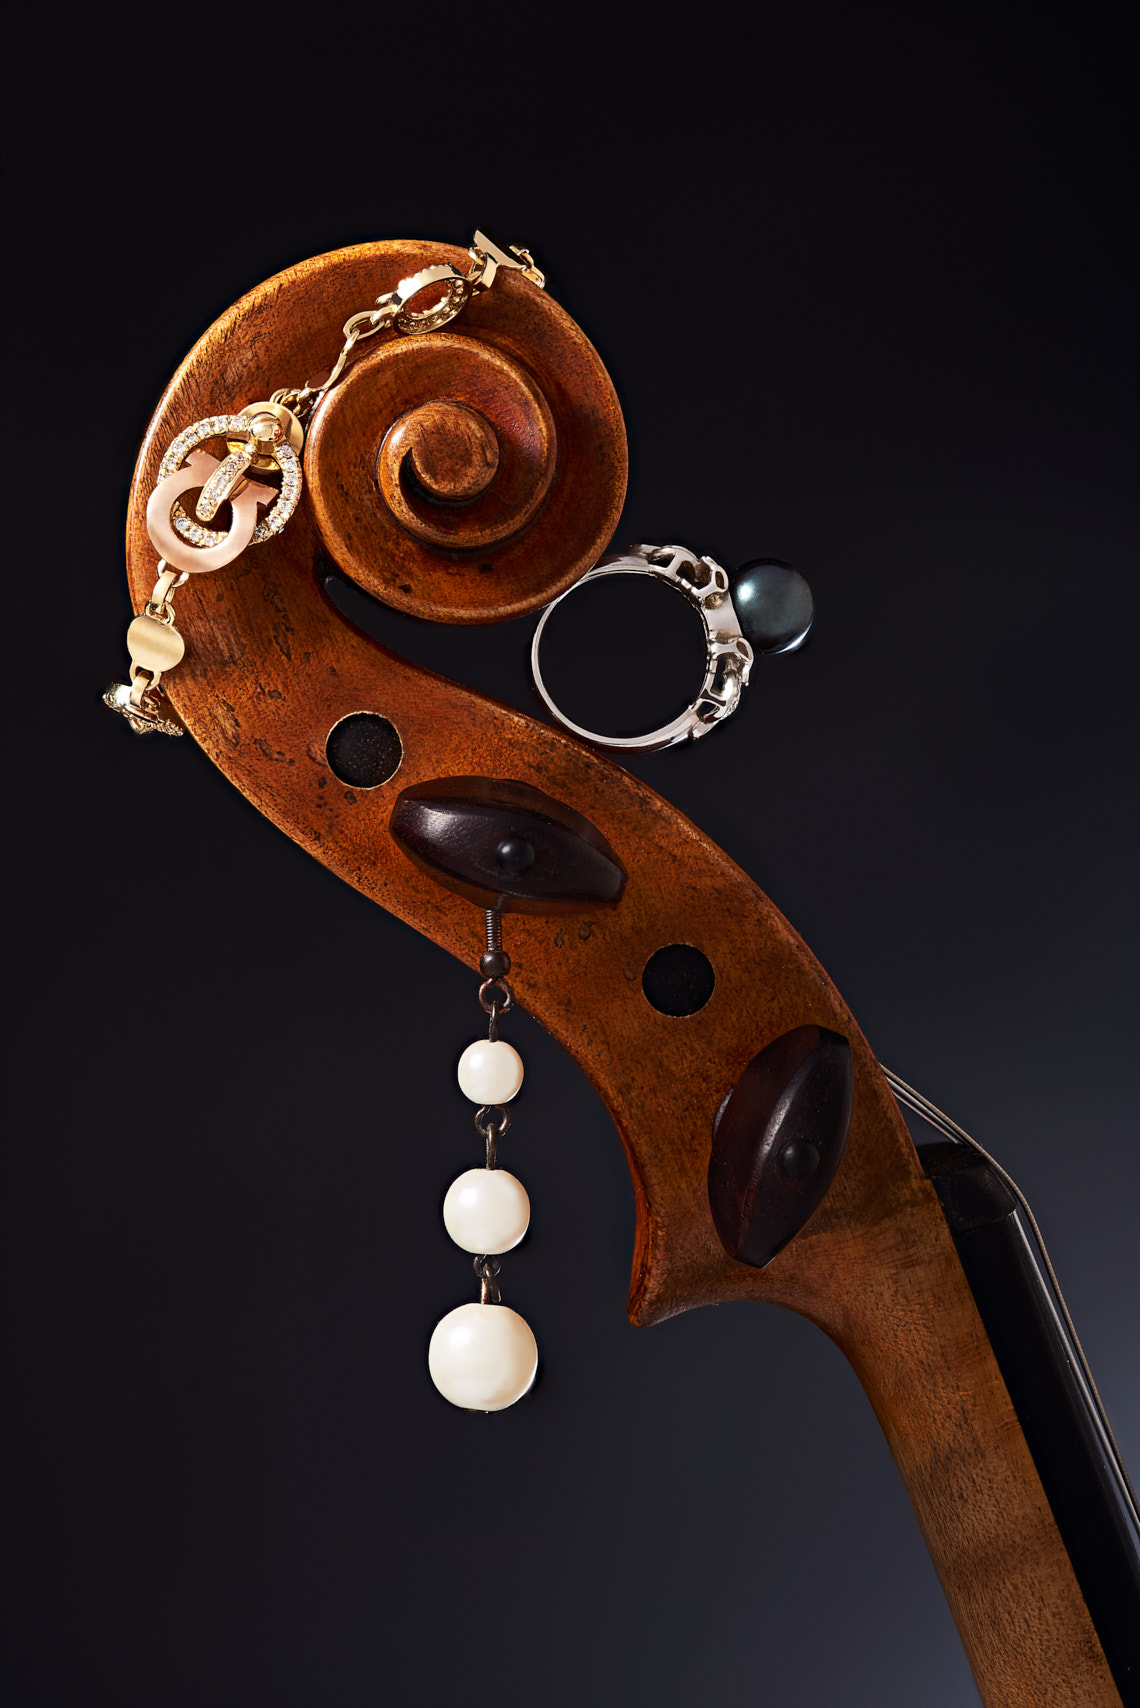 jewelry editorial on a violin head with pearl earring, ring, and pendant